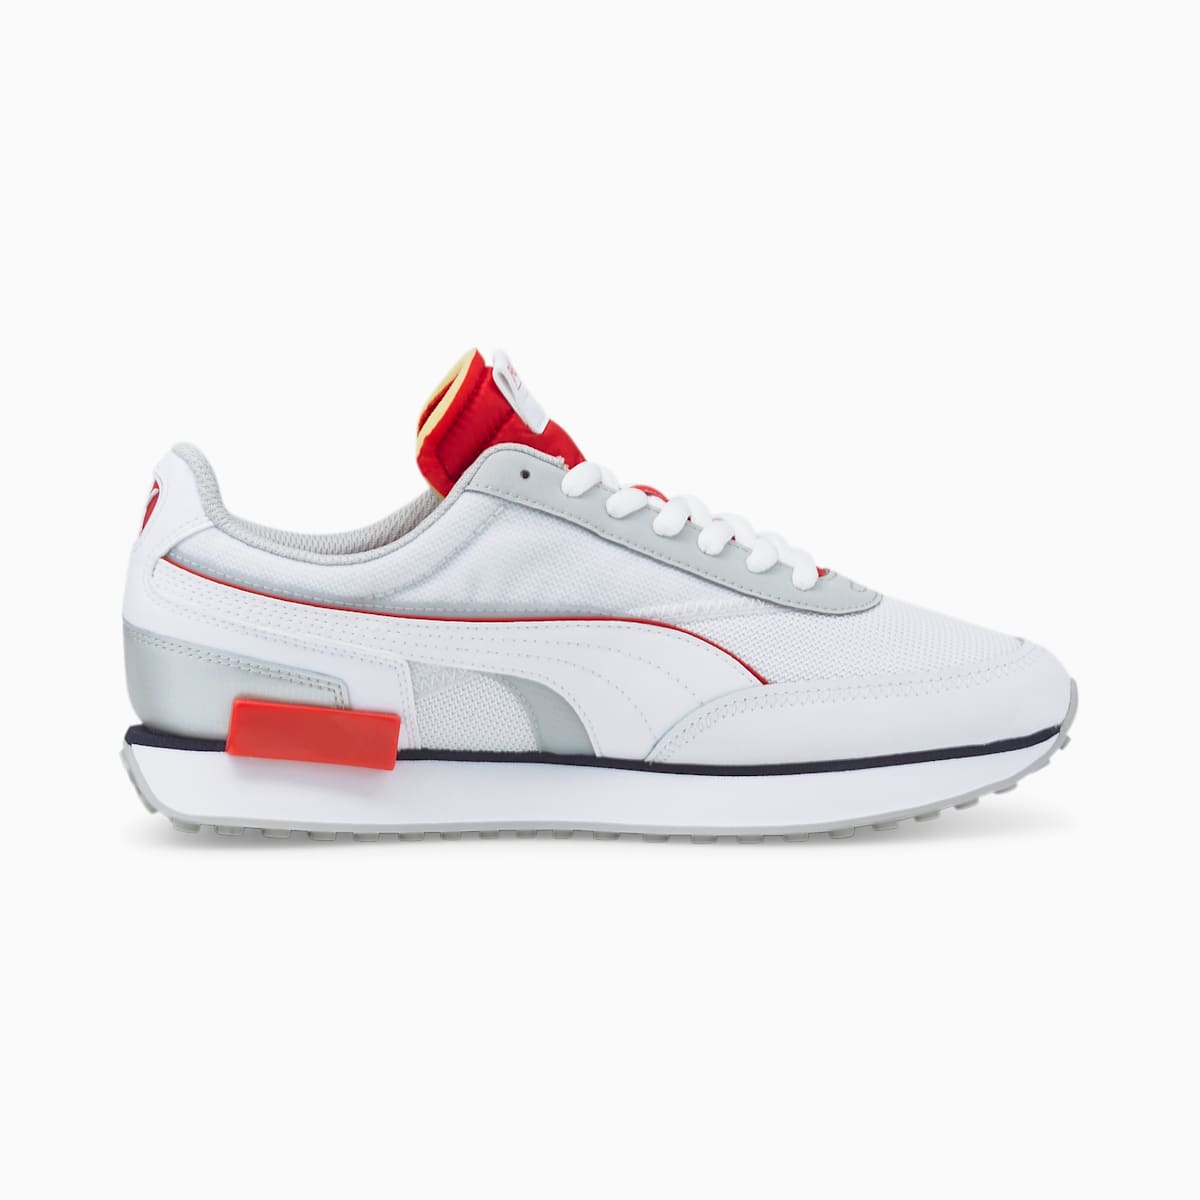 Tenis Puma Outlet Mexico - Future Rider Double Tech Mujer Blancos